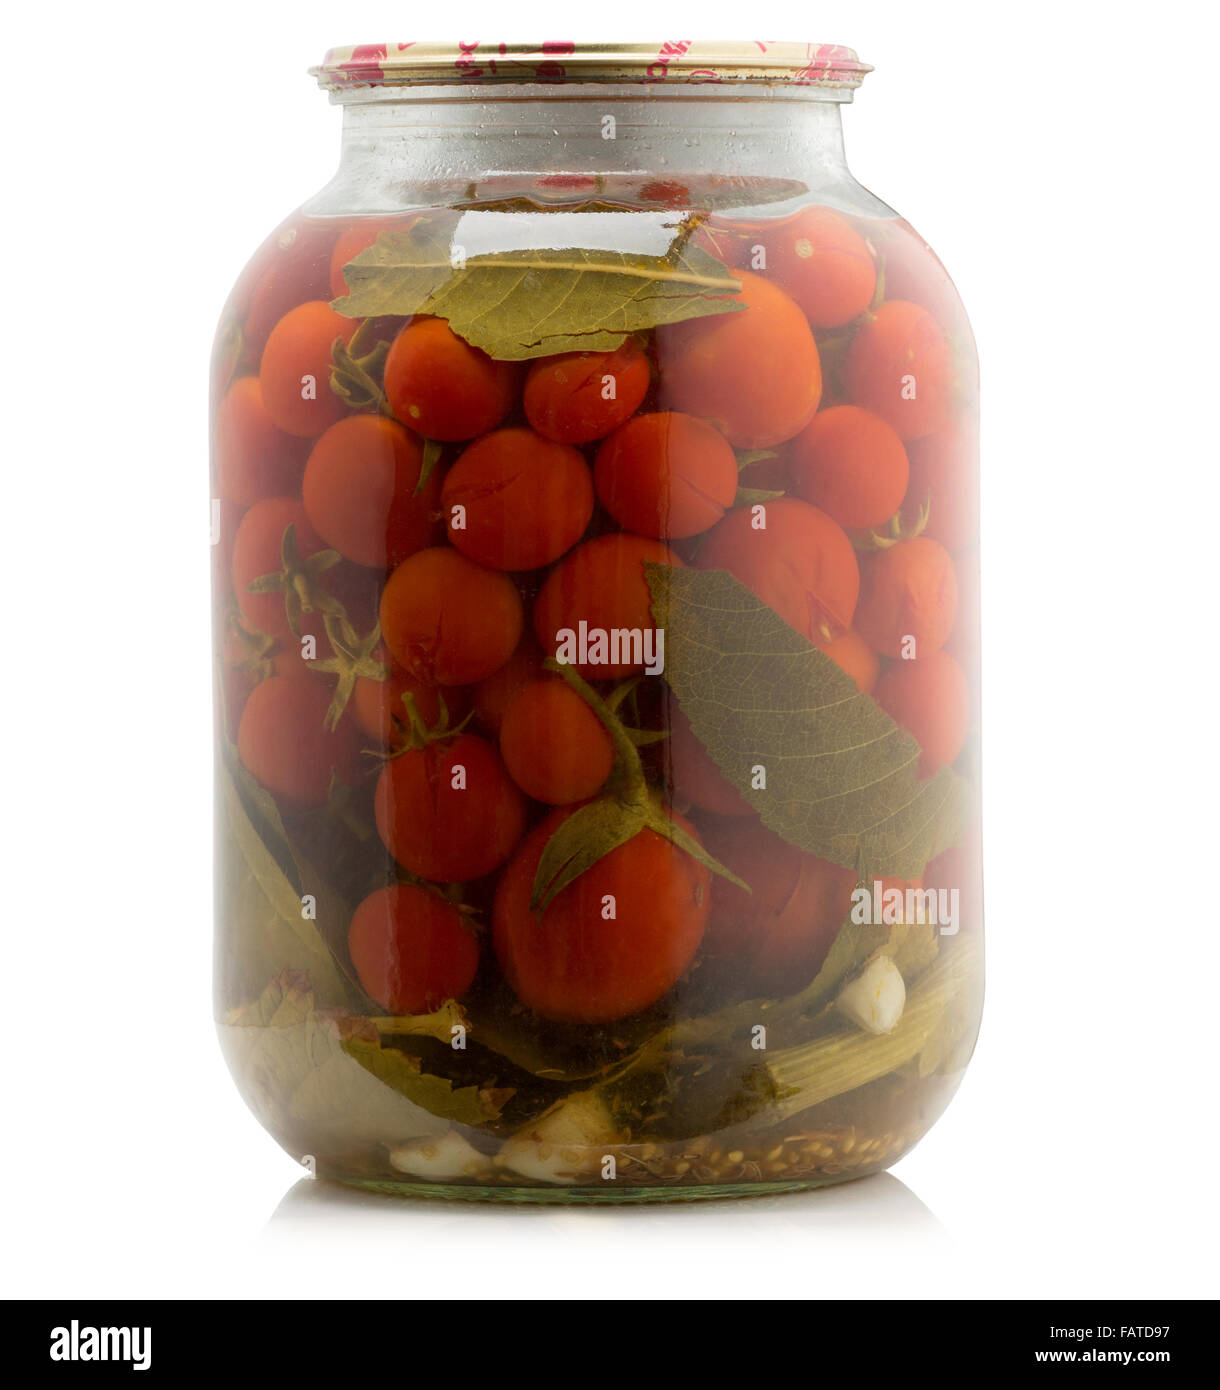 Marinated tomatoes canned in glass jar isolated on the white background. Stock Photo